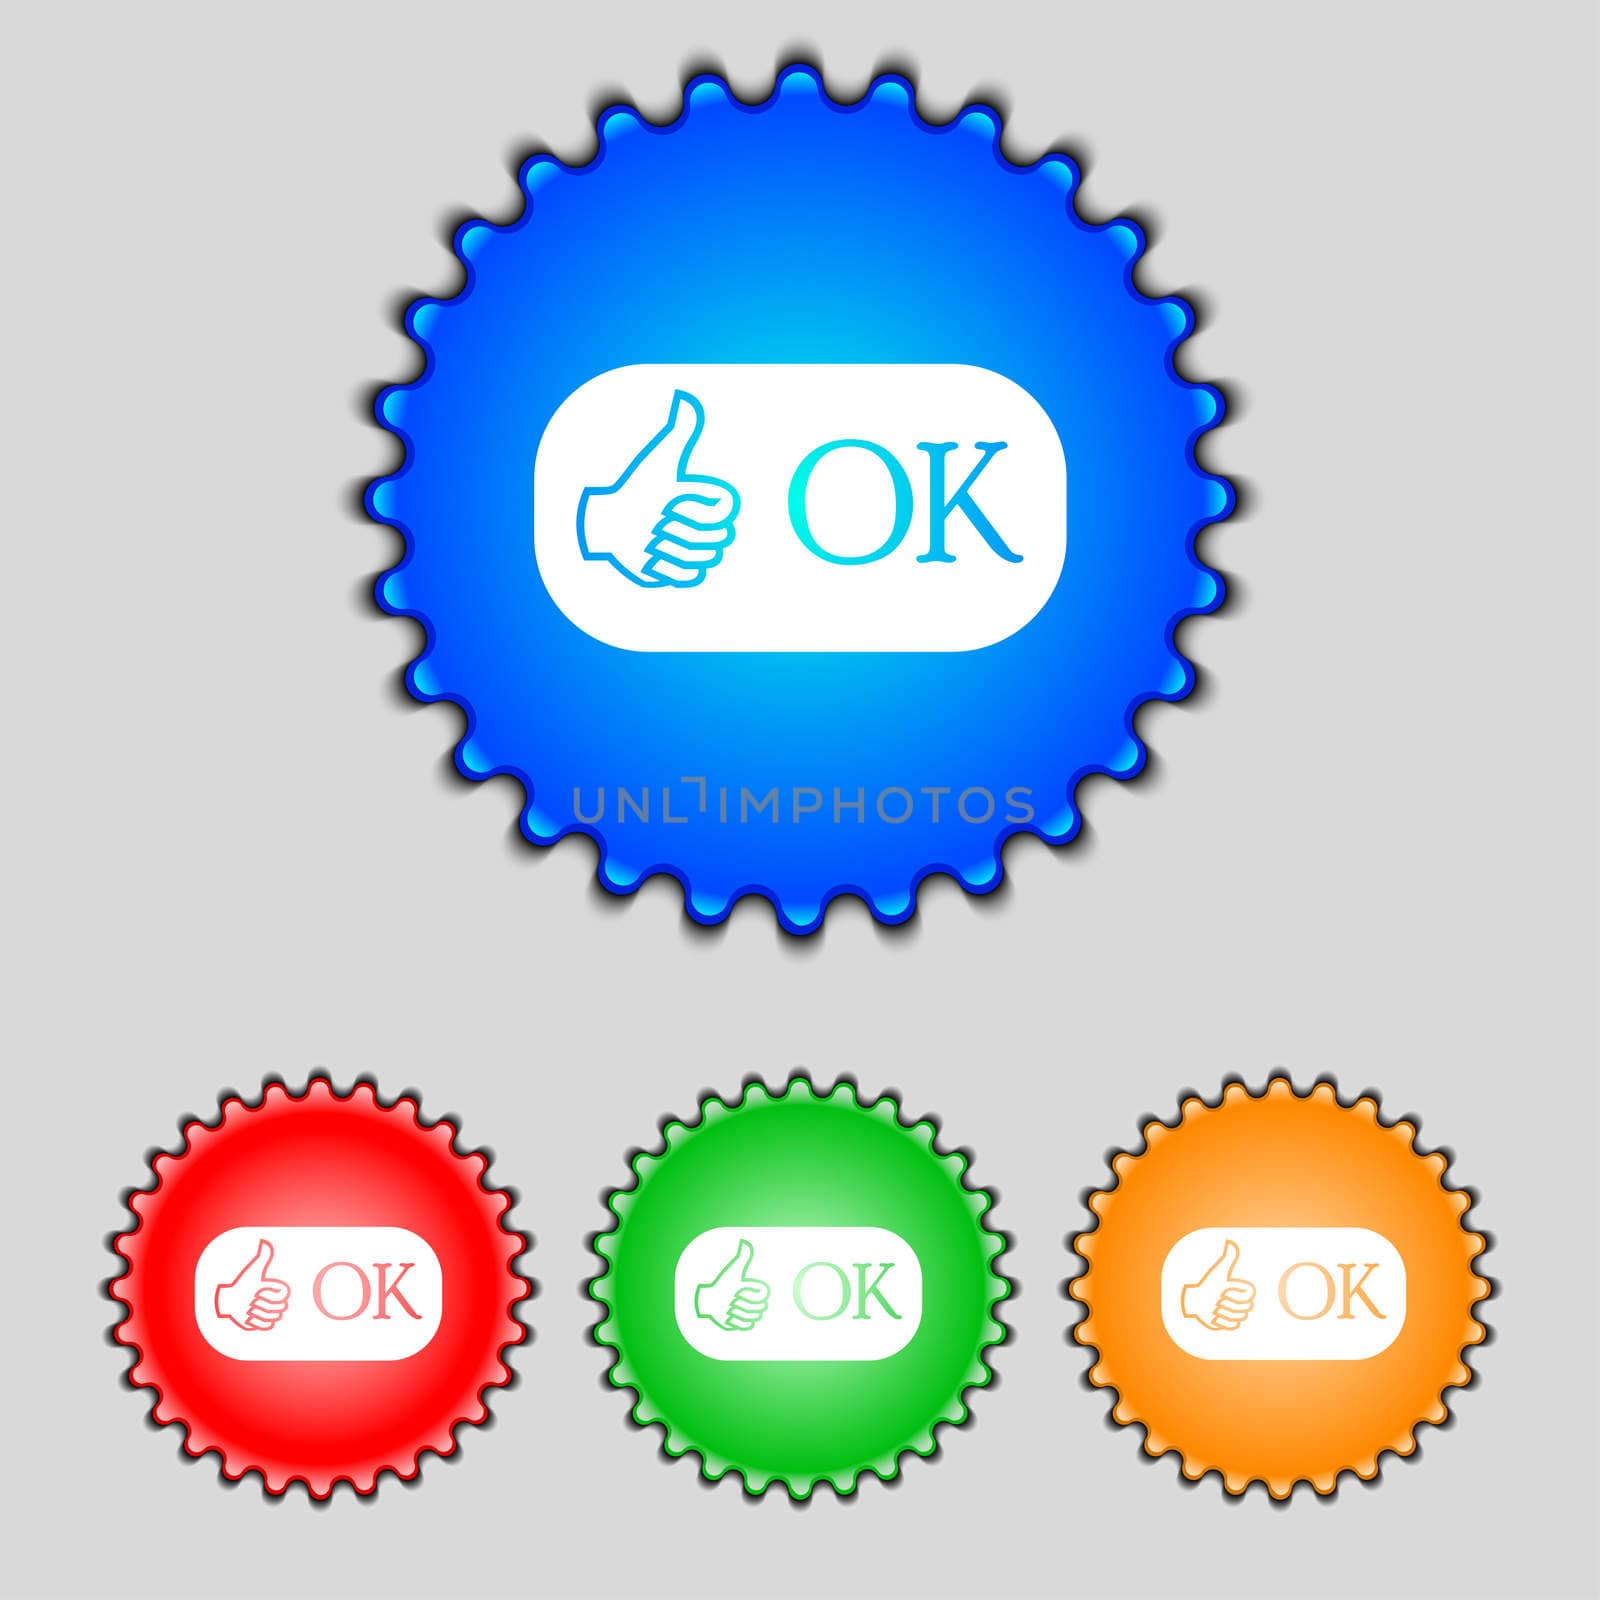 Ok sign icon. Positive check symbol. Set of colored buttons. illustration